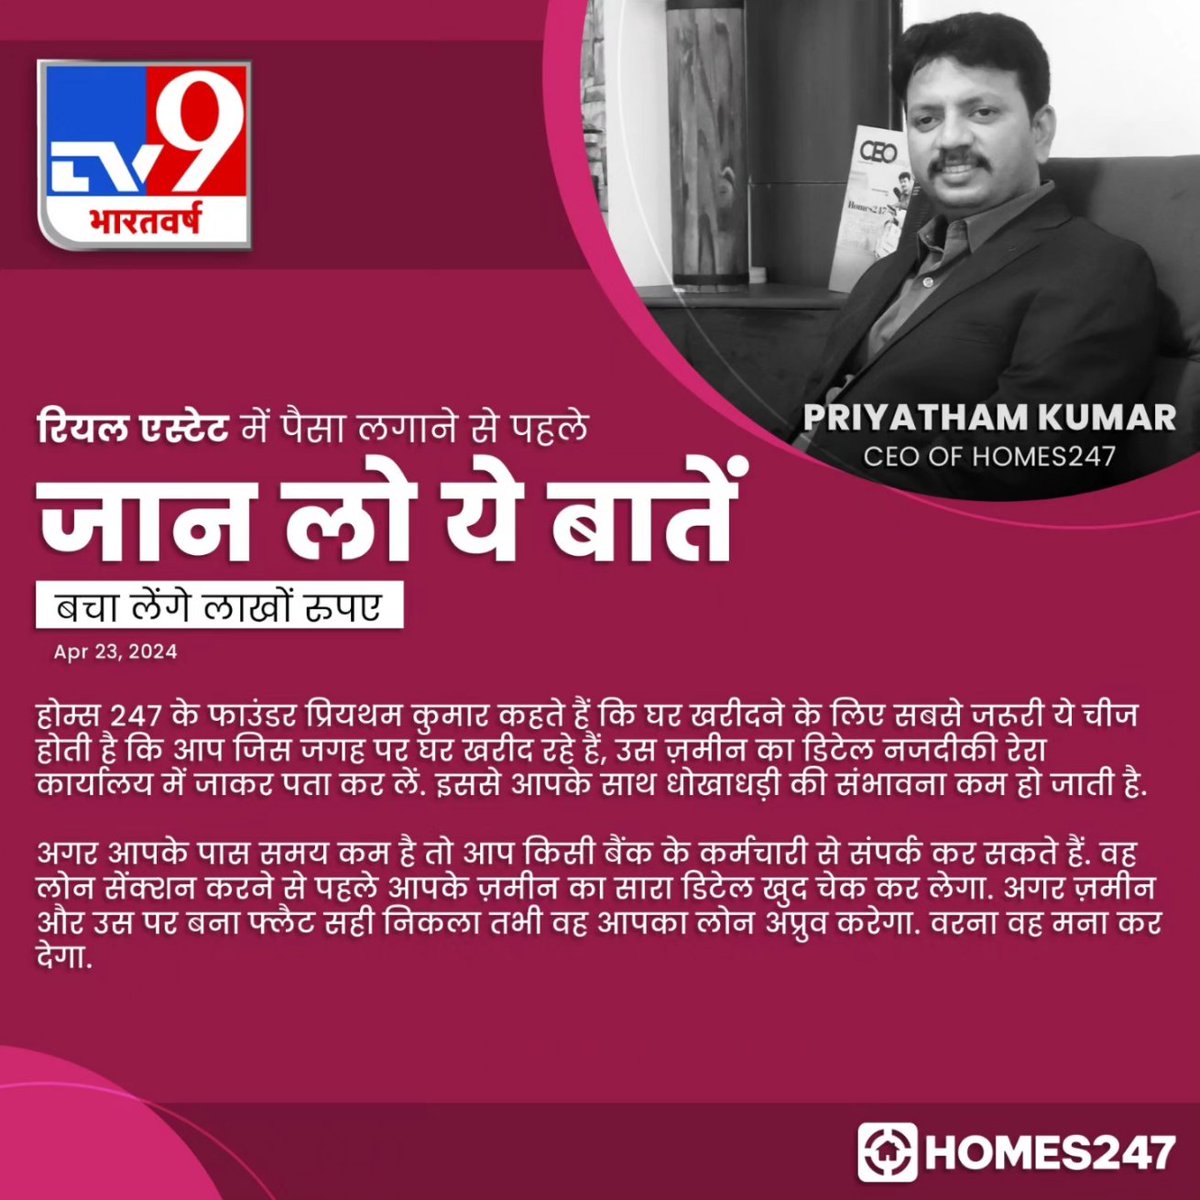 Get the inside scoop from Priyatham Kumar, CEO of Homes247, on crucial steps to take before investing in real estate! 

Read the full article by clicking the link below
tv9hindi.com/business/know-…

#newsarticle #PropertyRights #homes247 #RealEstate #RERA #propertyinvestment